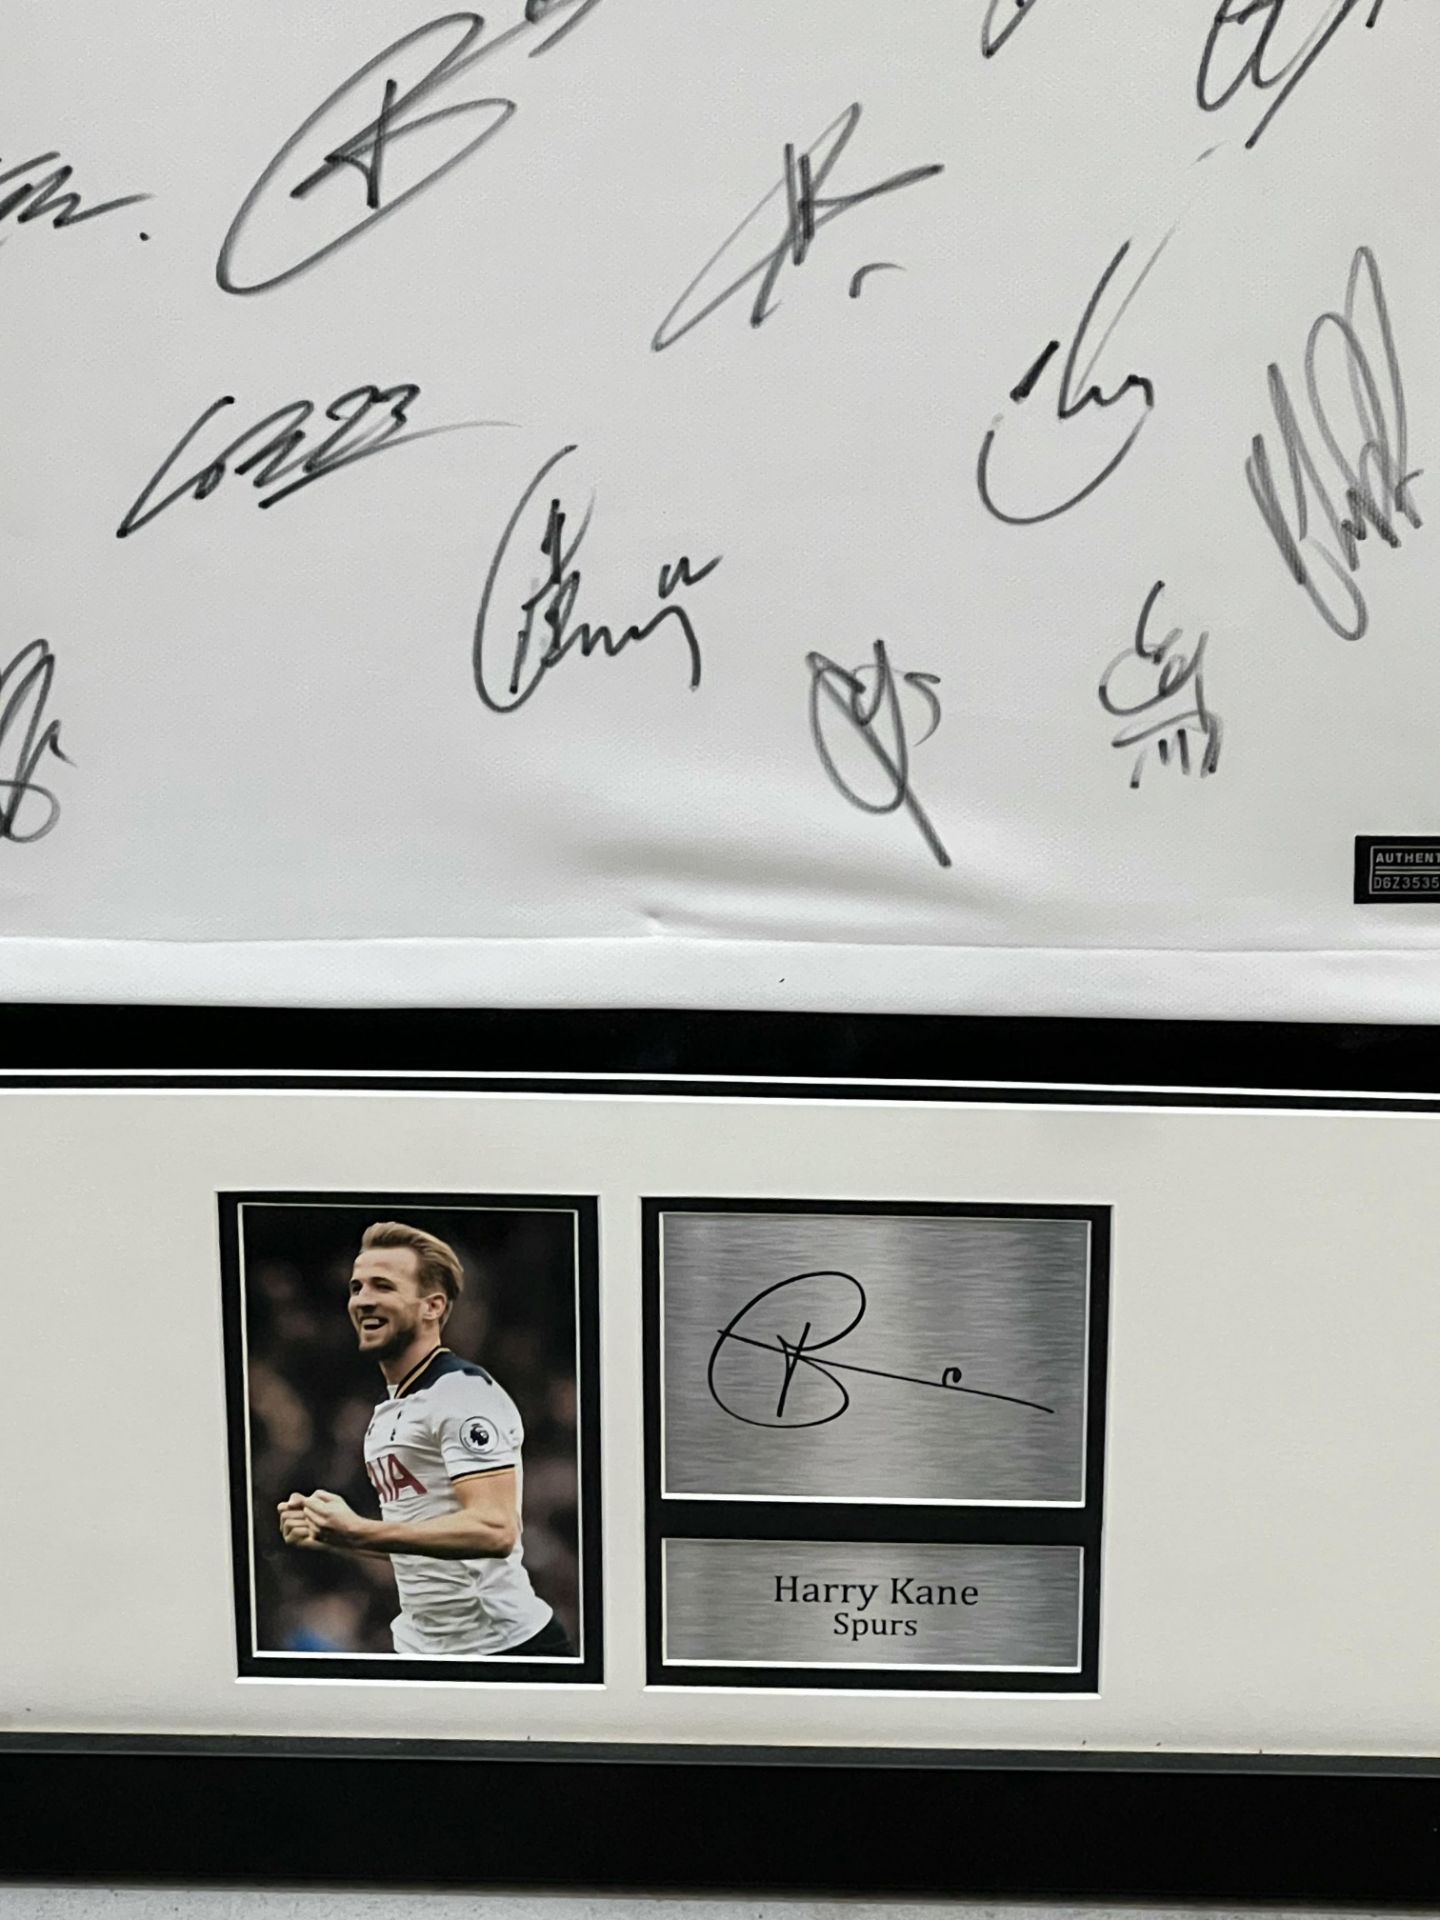 Authentic Tottenham Hotspur hand signed shirt display from the season 2017-18. The 17 signatories - Image 5 of 12